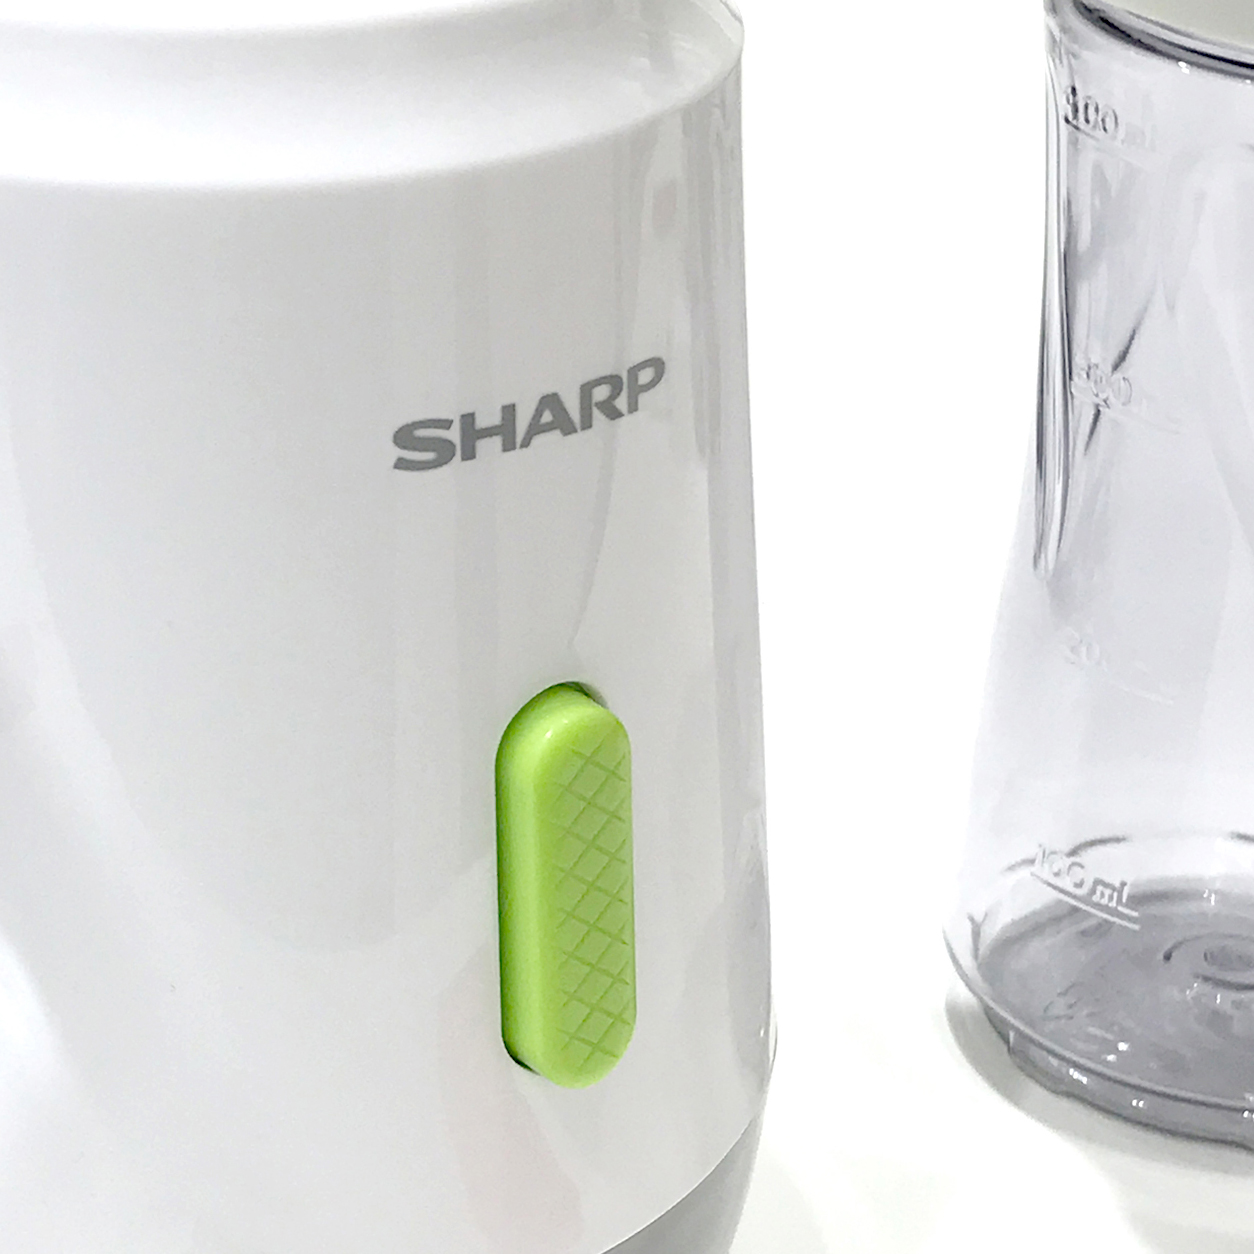 Details of the design of the new Sharp SDA personal blender 